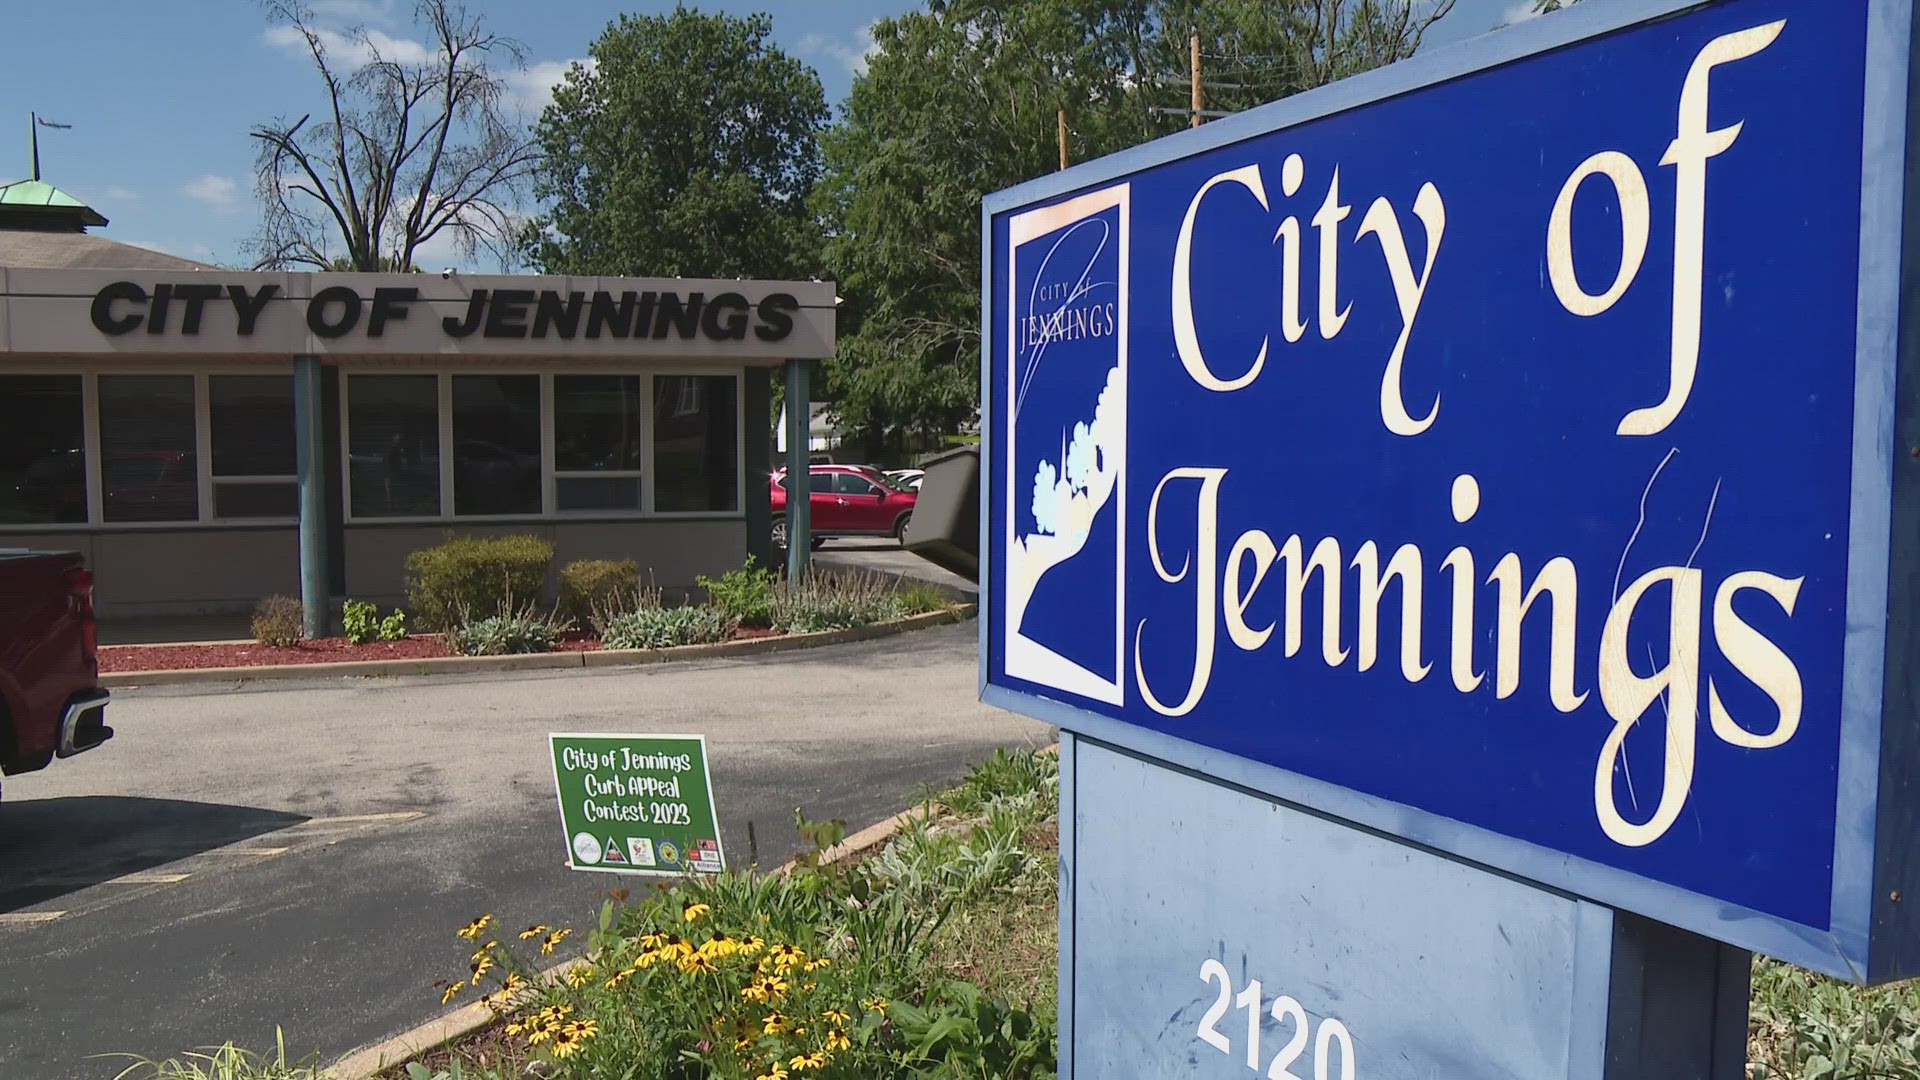 A total of five city leaders in Jennings turned in their resignation letters. The mayor had no comment on the allegations.